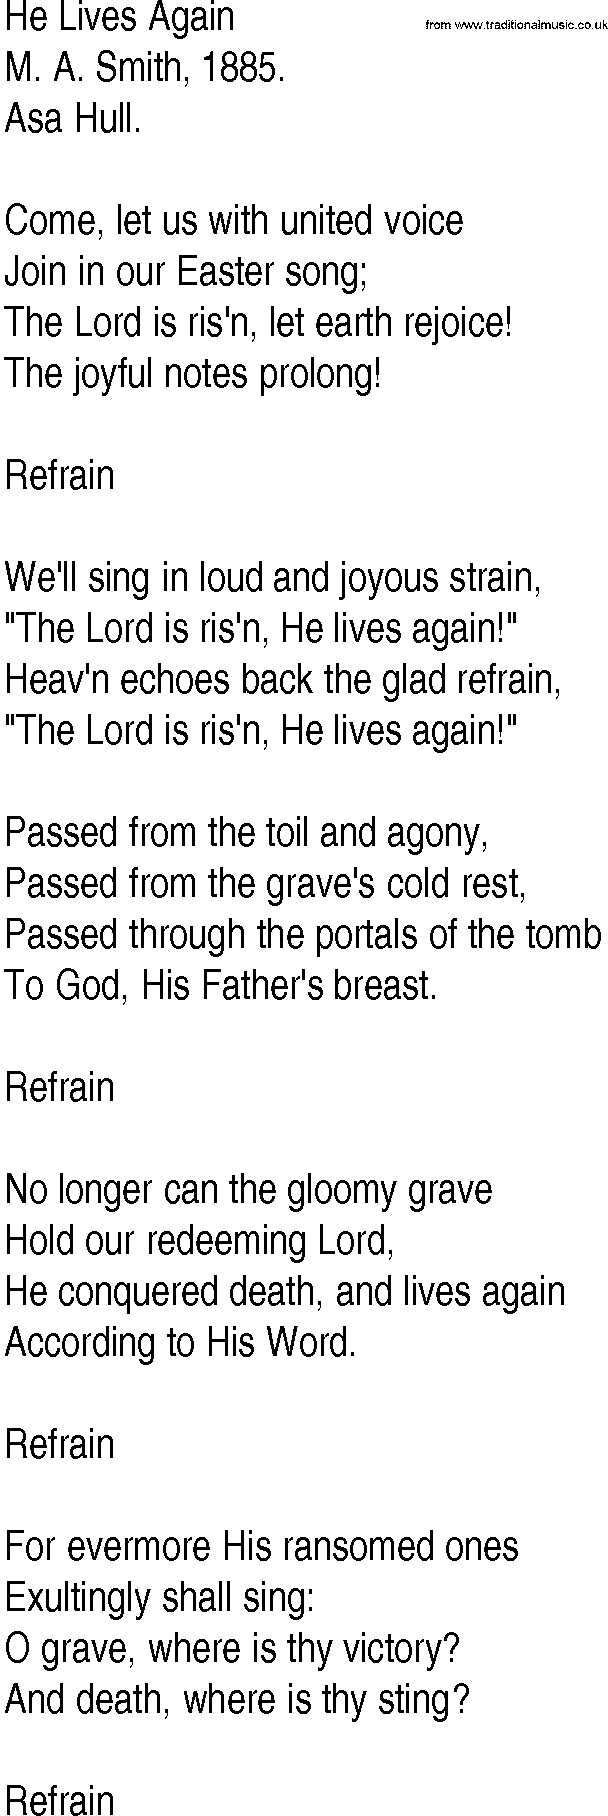 Hymn and Gospel Song: He Lives Again by M A Smith lyrics